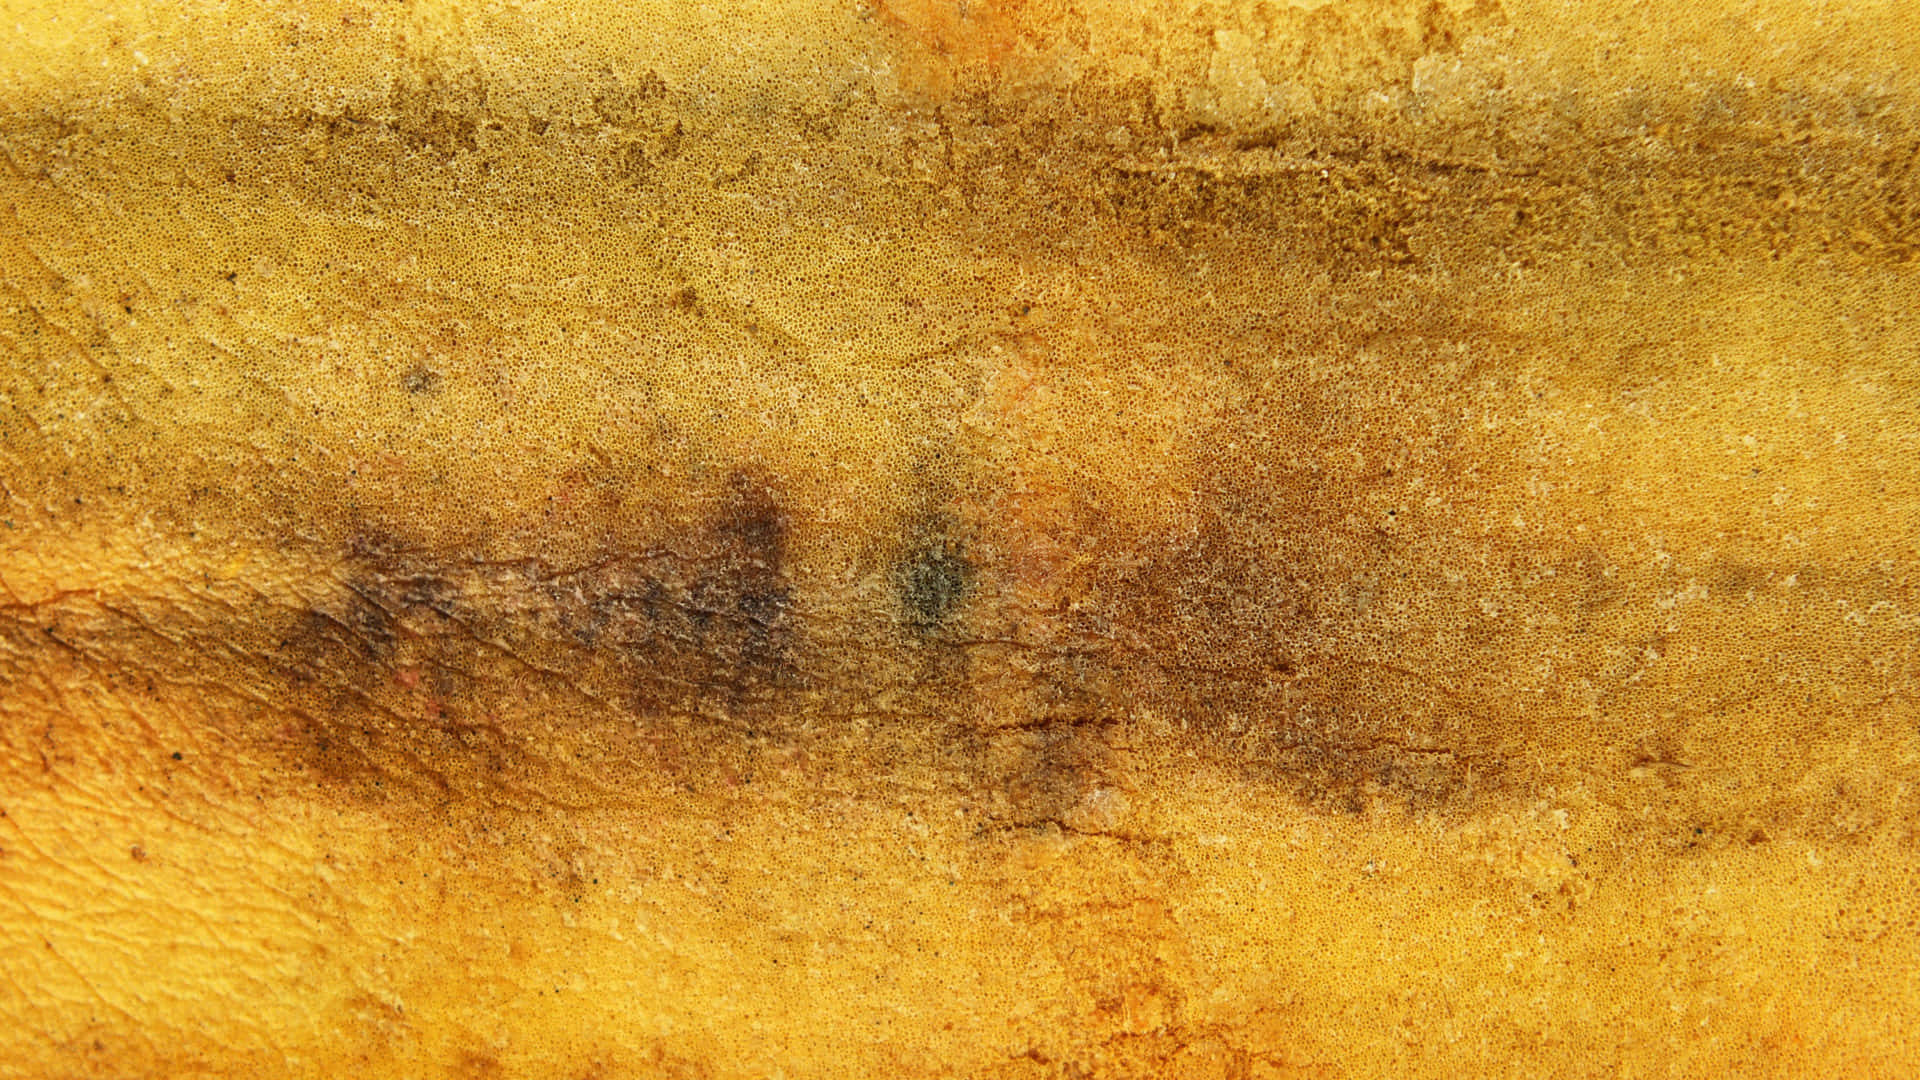 Grunge Yellow Texture: A Vibrant and Rough Background